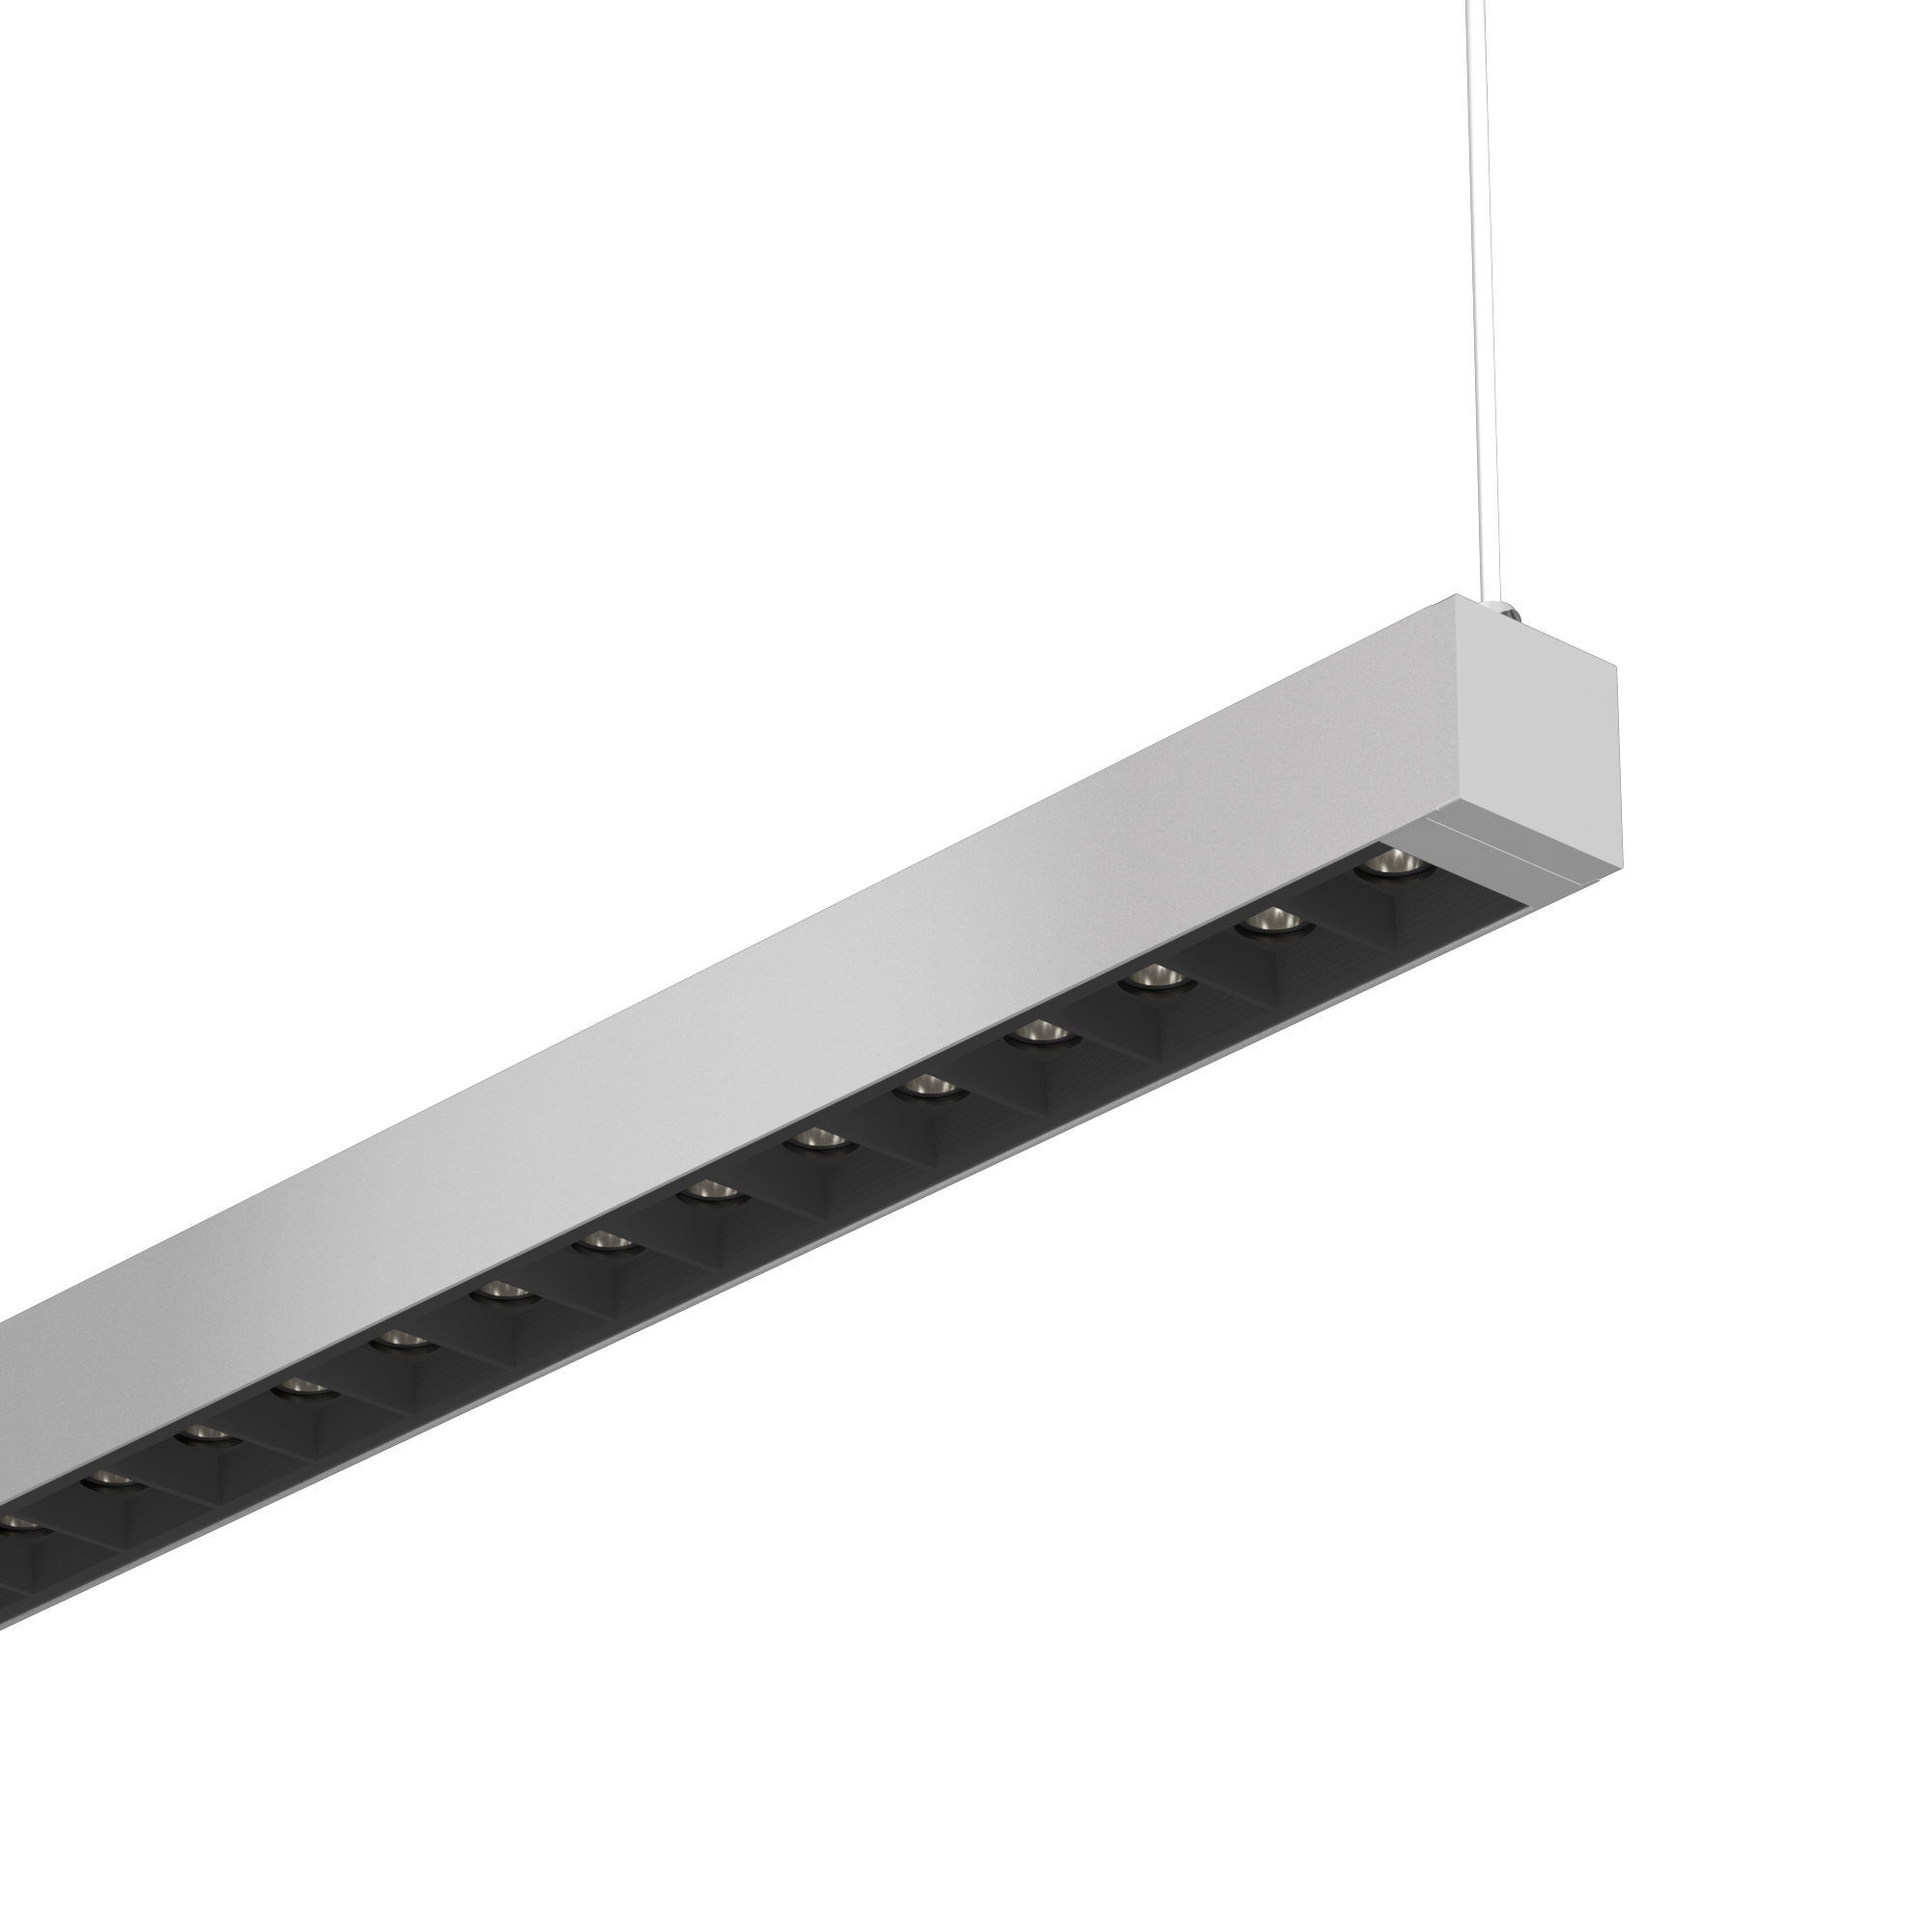 MICROSquare MCO Linear Pendant is a low glare (UGR<19) linear pendant providing up to 1000lm/ft. Incredibly low profile with 1.4″ width and available with remote driver. The MCO Linear Pendant brings SmartBeam® capabilities to a scale designed to compliment architectural space. MCO Linear Pendant is available in a variety of mounting options and a wide choice of colors and finishes.